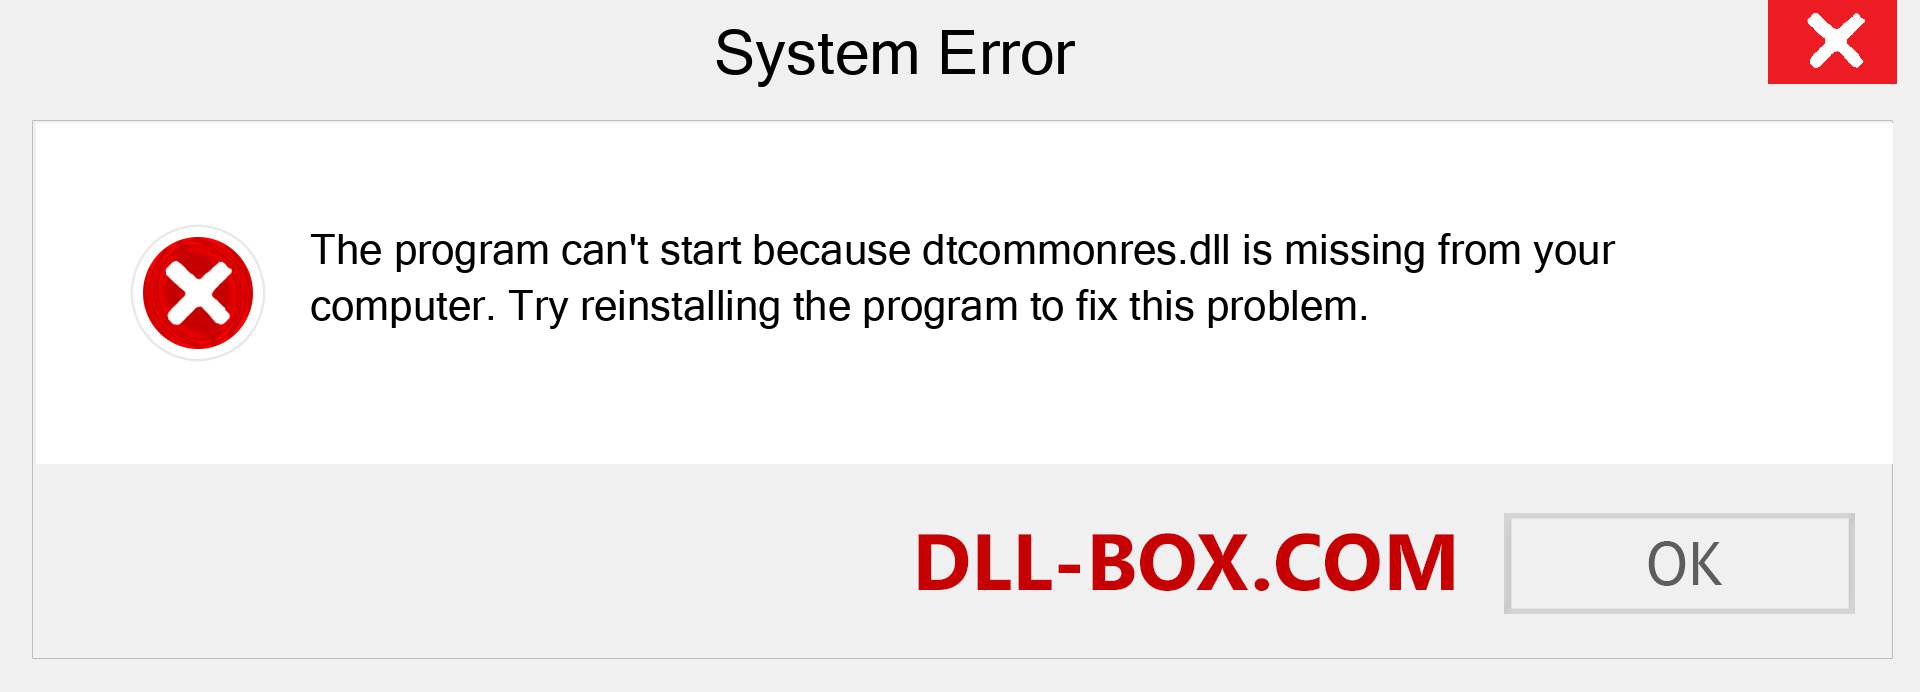  dtcommonres.dll file is missing?. Download for Windows 7, 8, 10 - Fix  dtcommonres dll Missing Error on Windows, photos, images